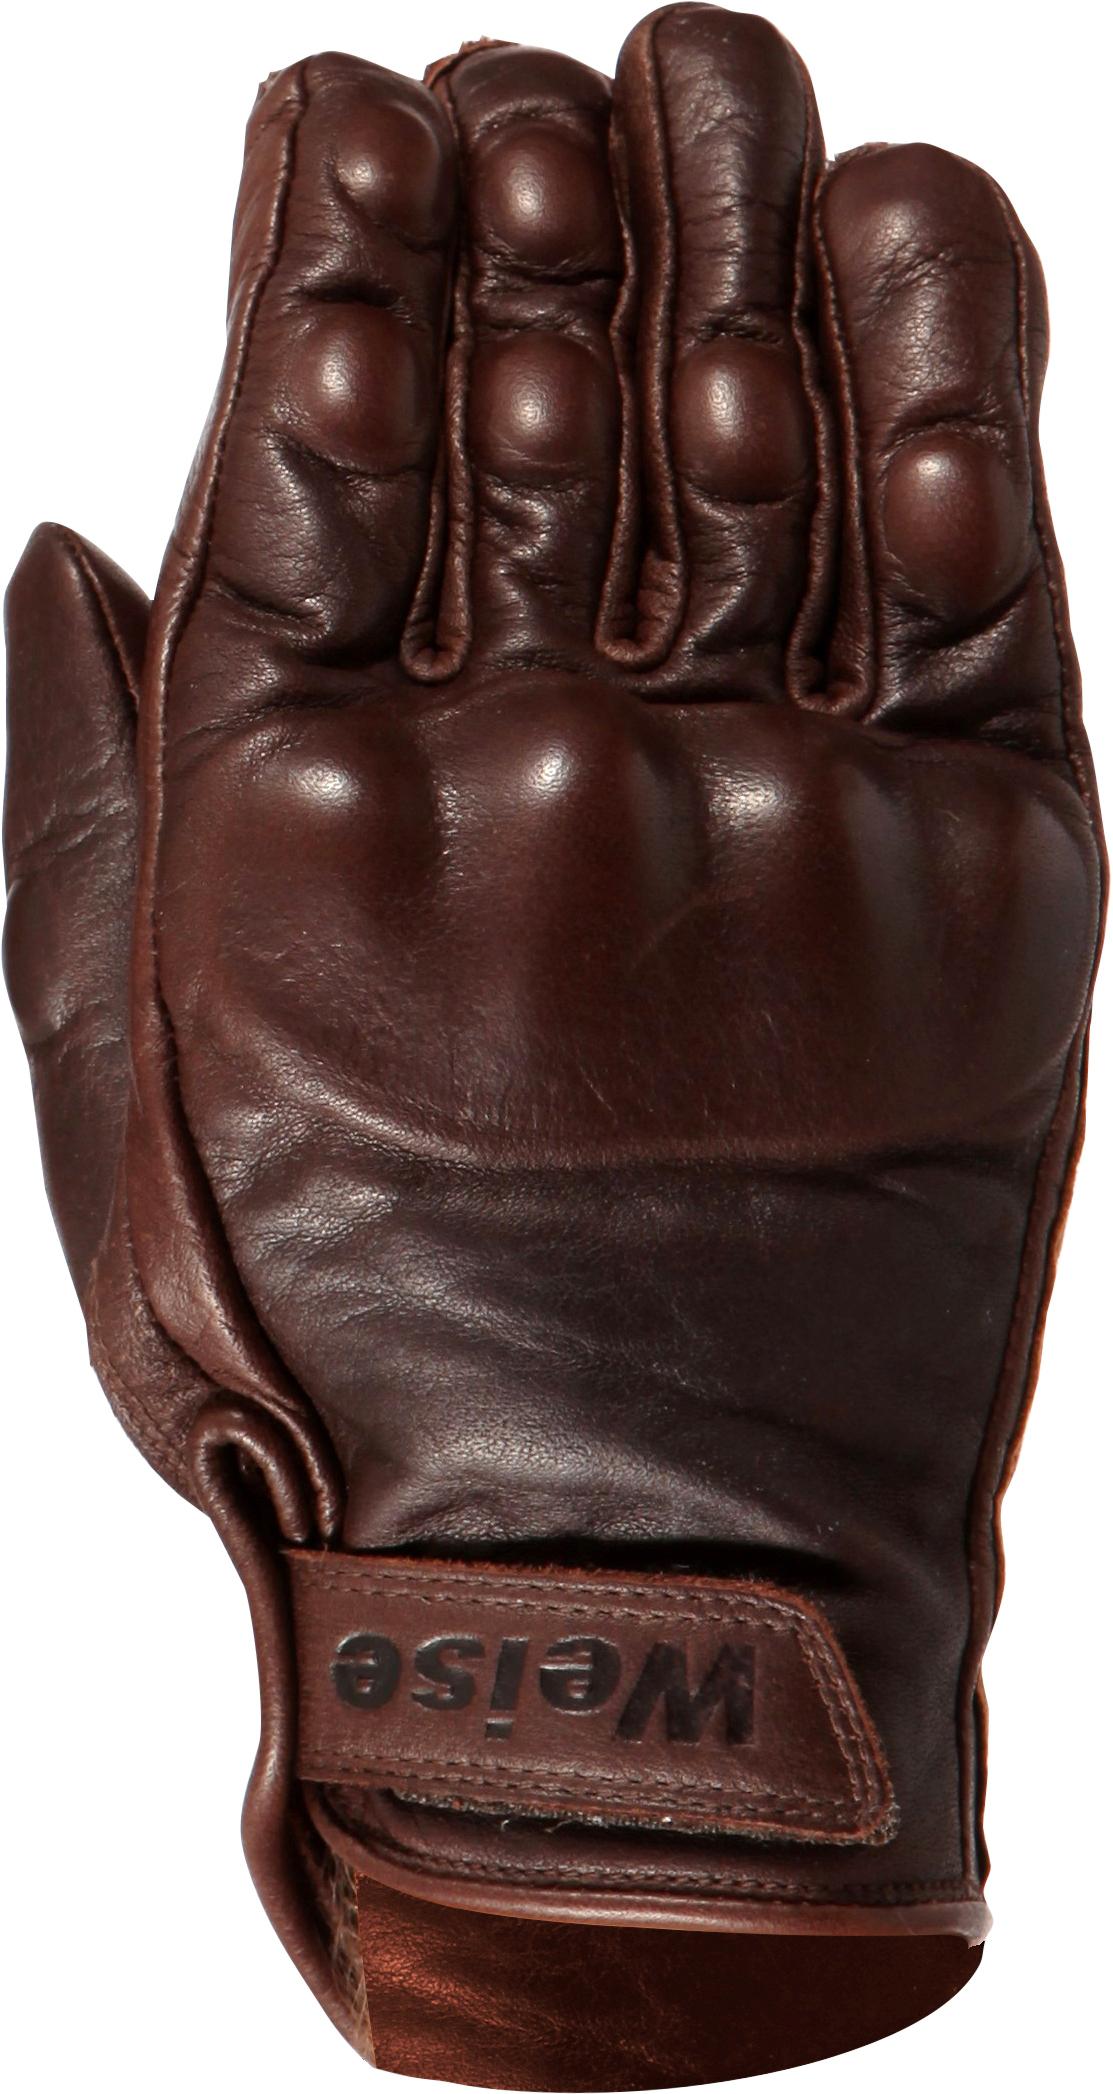 Weise Victory Gloves Brown Large